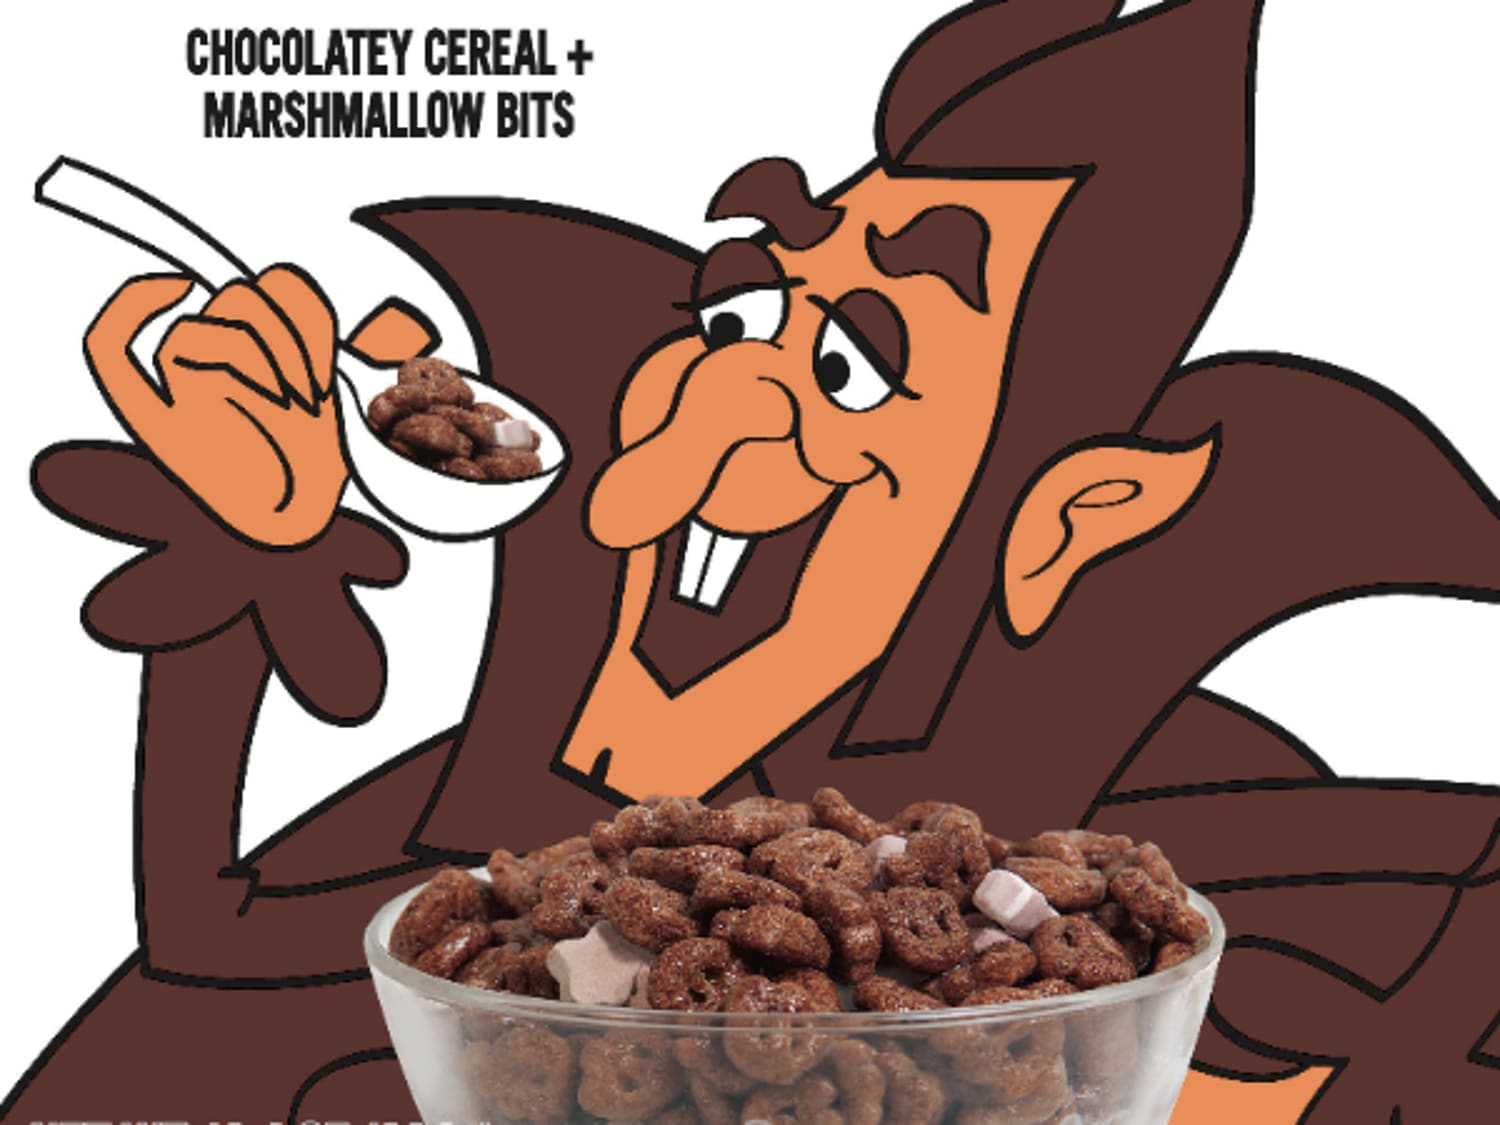 Count Chocula box from 2013